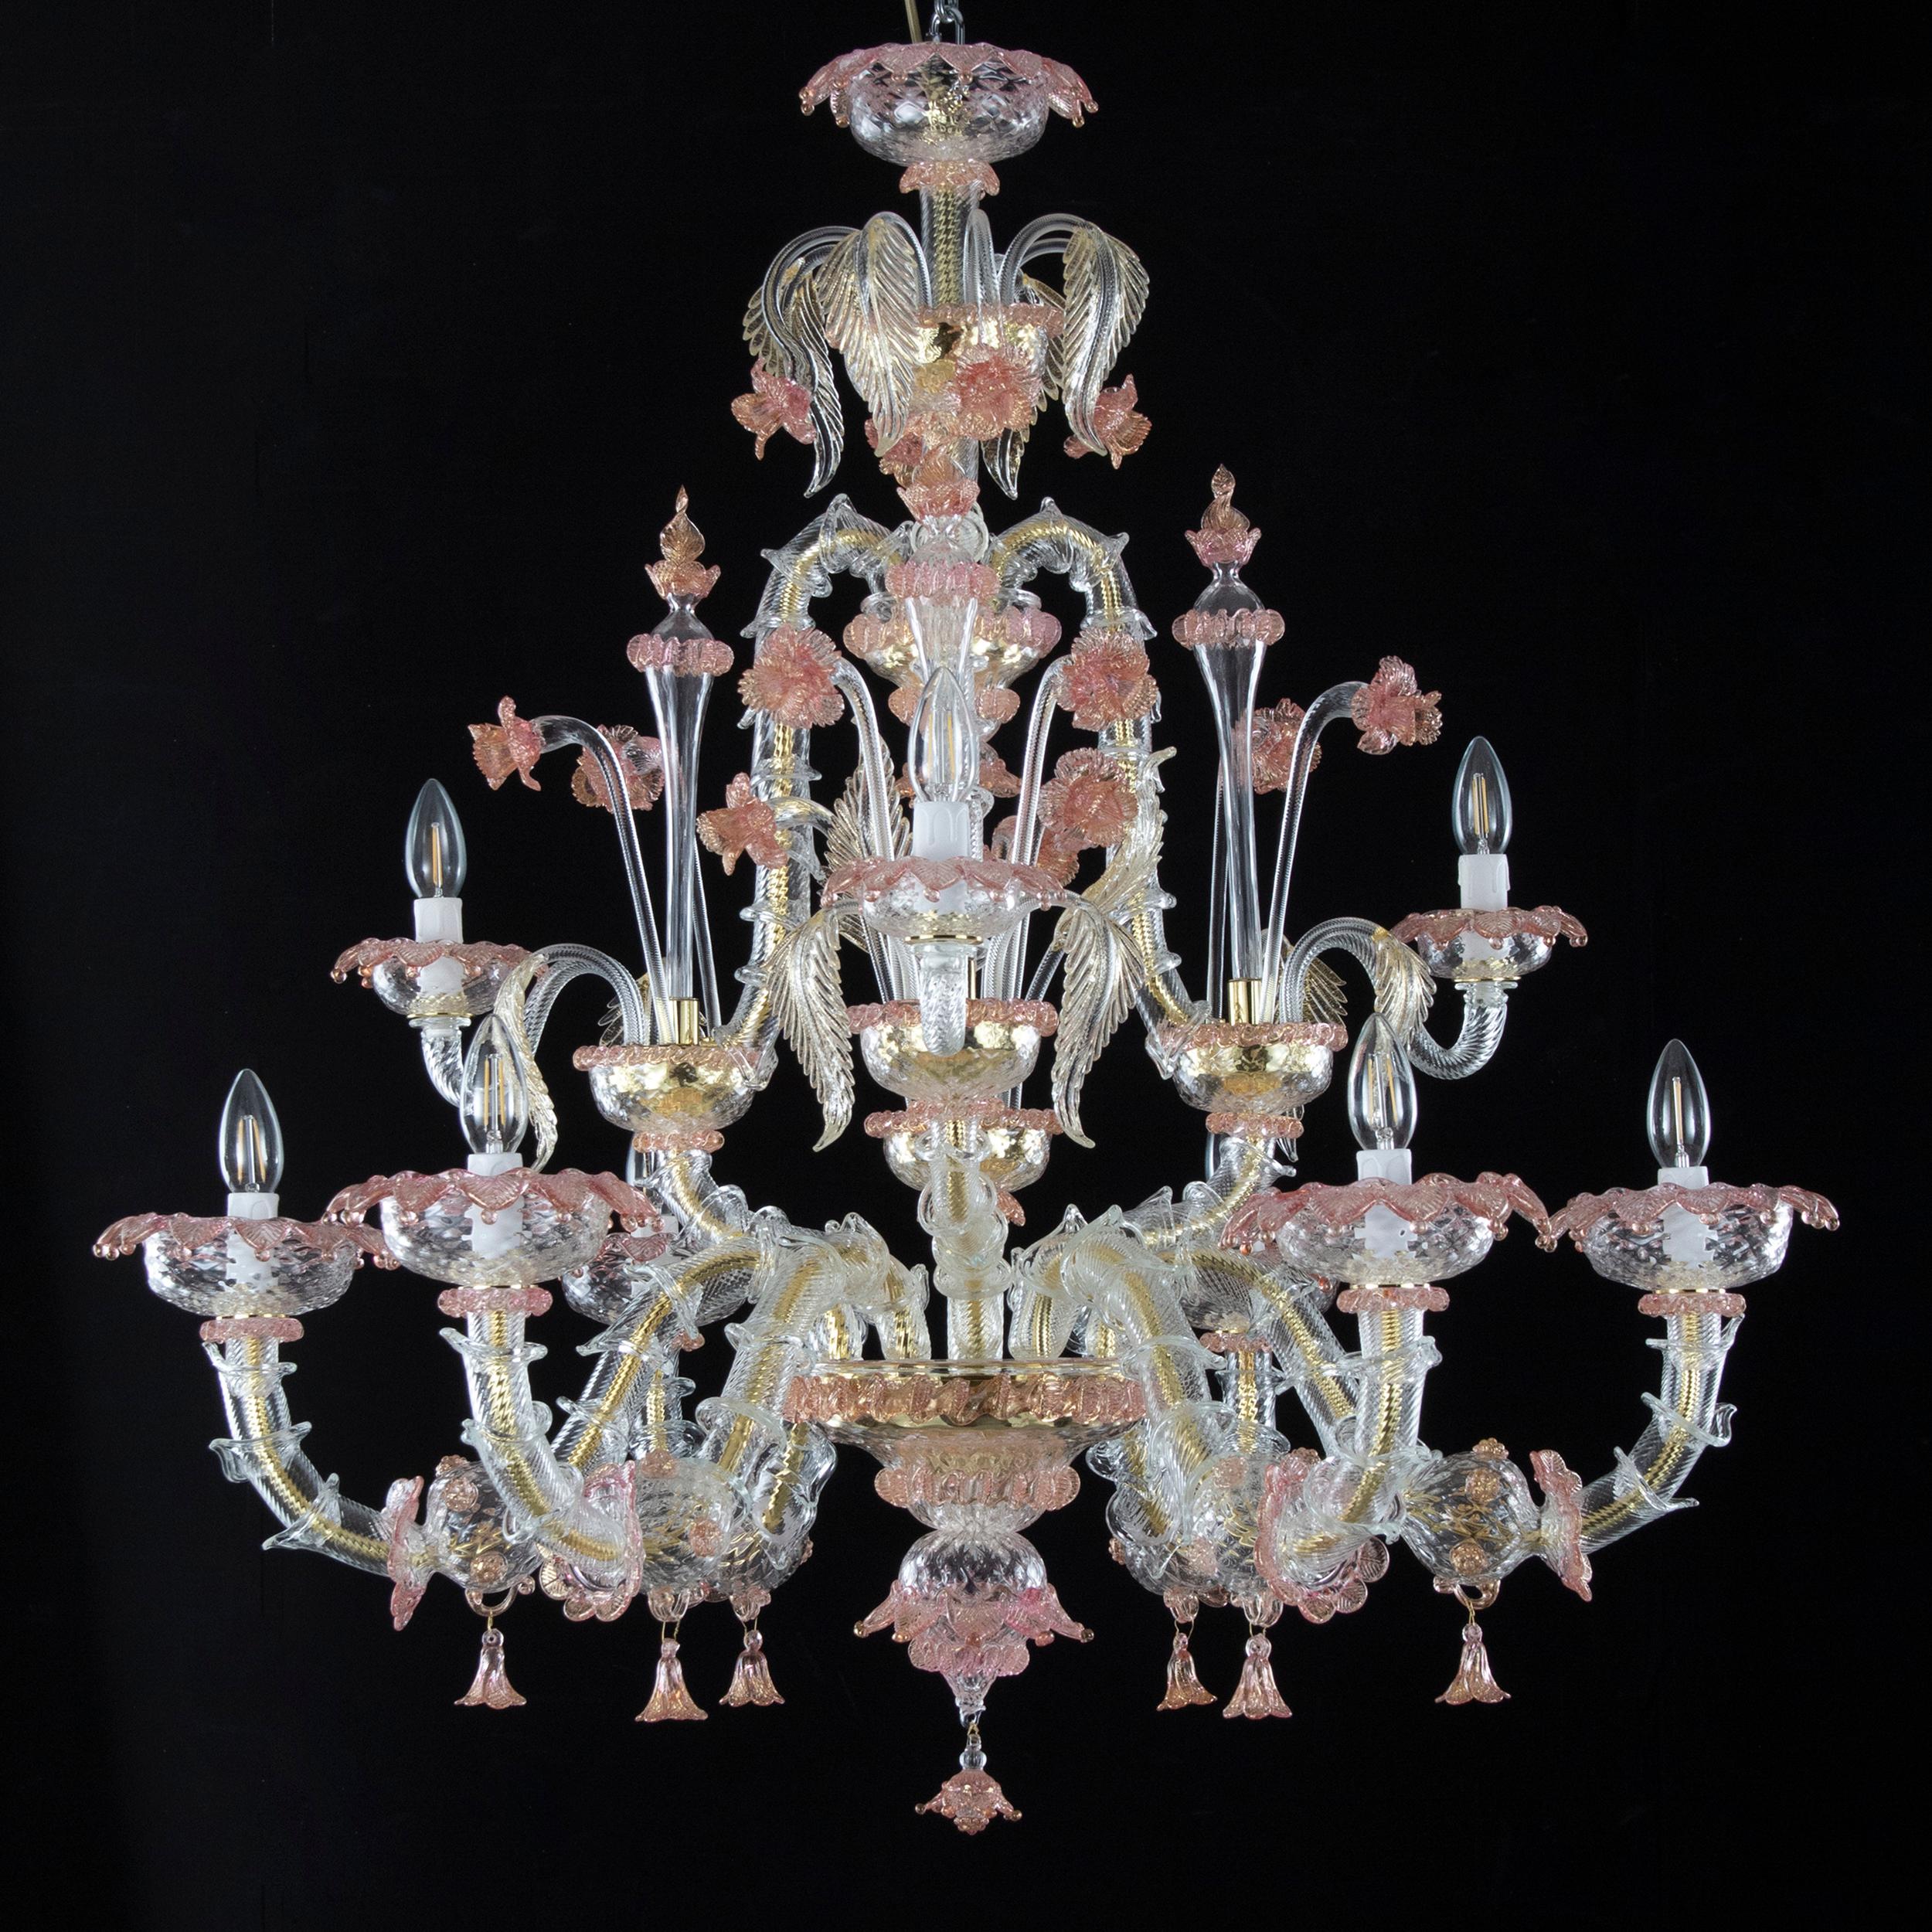 The Murano glass chandelier in Rezzonico style is a romantic lighting work, inspired from the luxurious halls of the venetian buildings on the Canal Grande.
The colors, the floral decorations, the Rezzonico arms, the pendant elements… all the